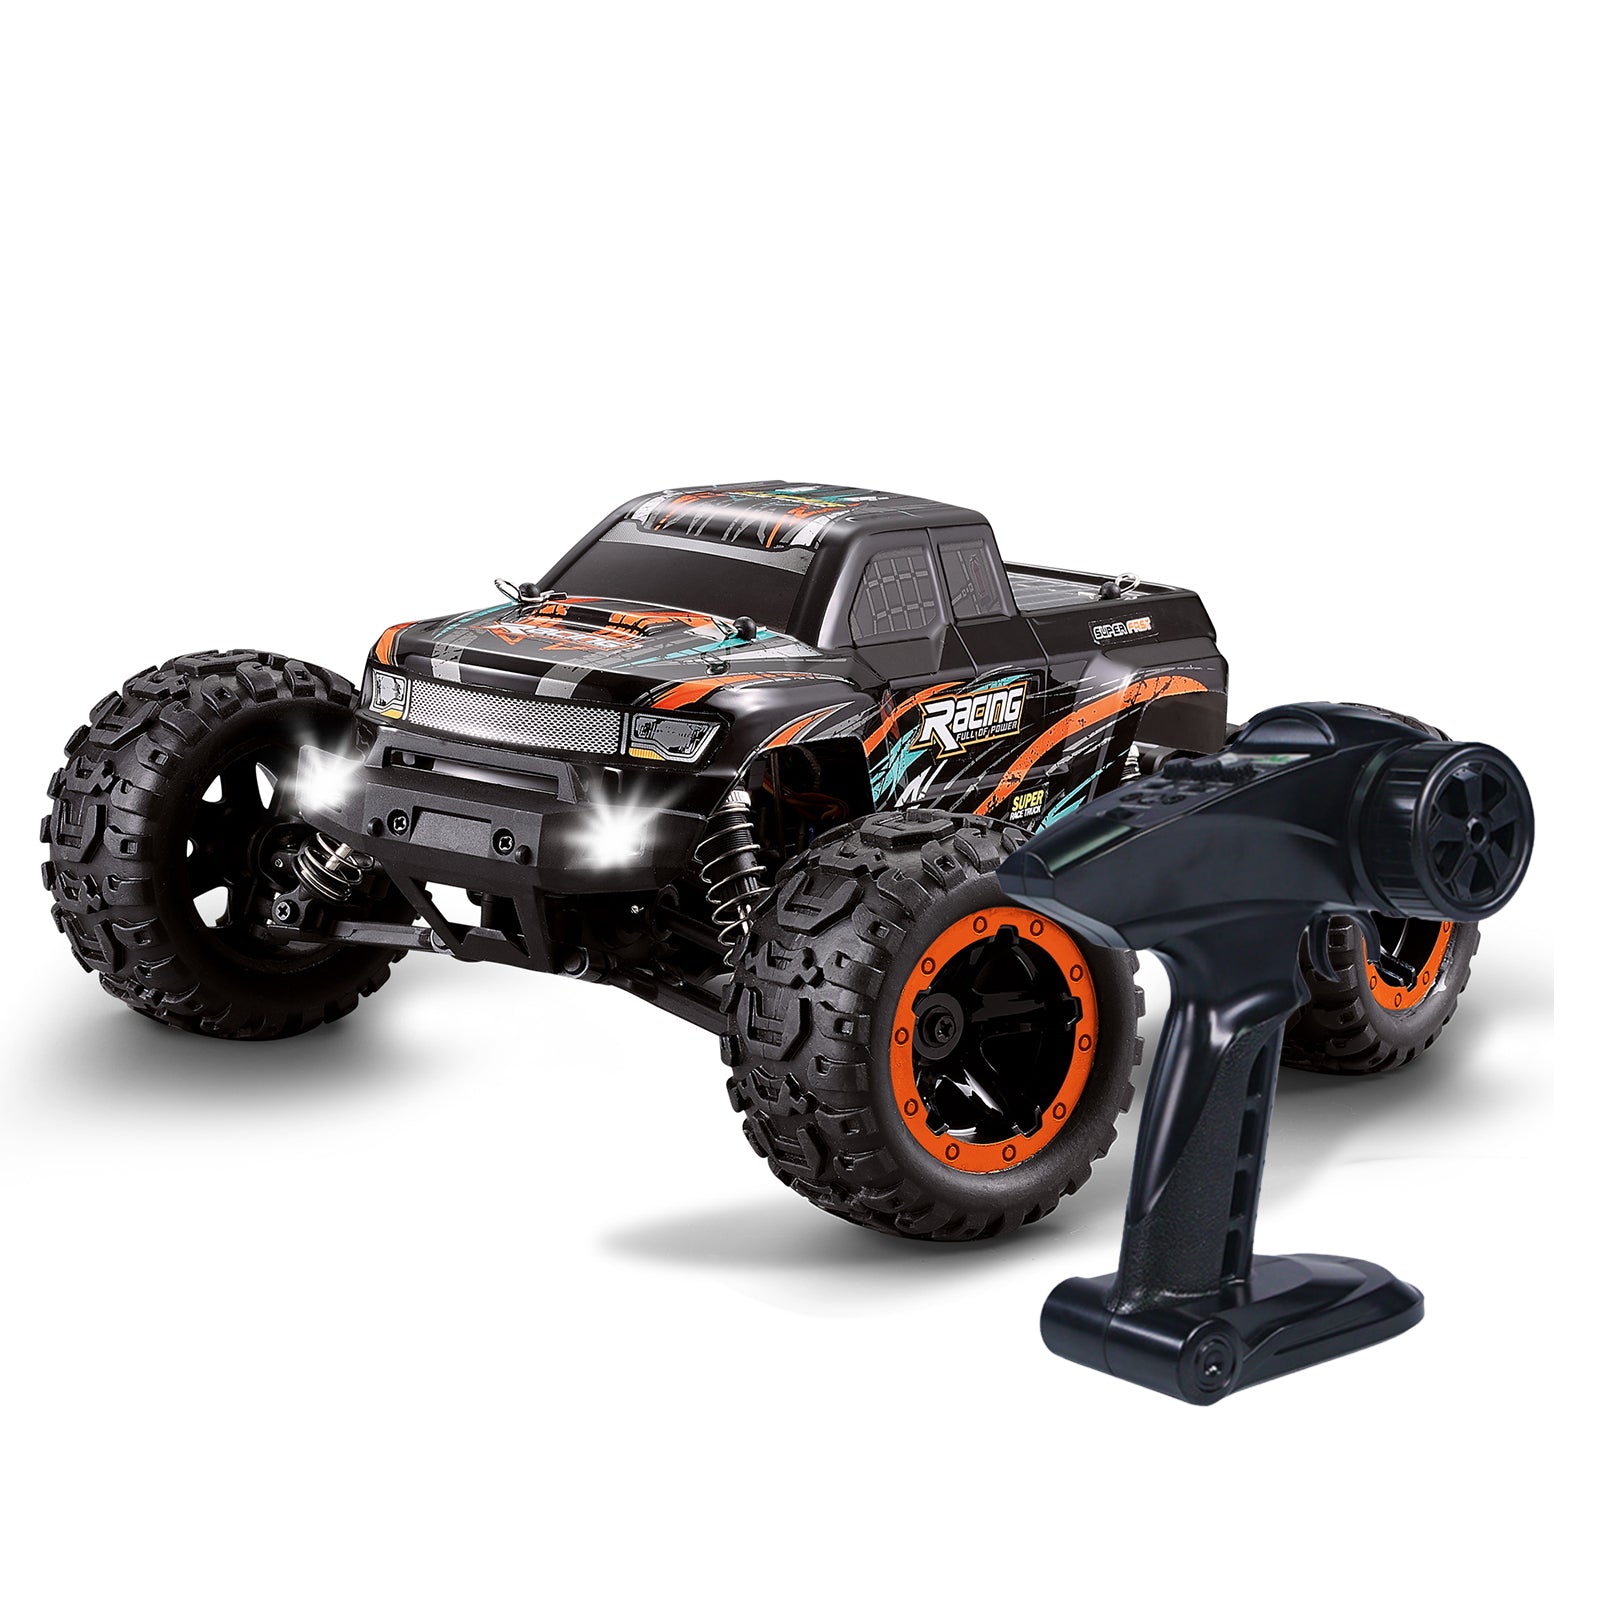 HAIBOXING 16889A 1:16 45KM/H 4WD High Speed Electric Vehicle 2.4 GHz  All-Terrain RC Car Brushless Waterproof Off-Road Truck (RTR), EngineDIY